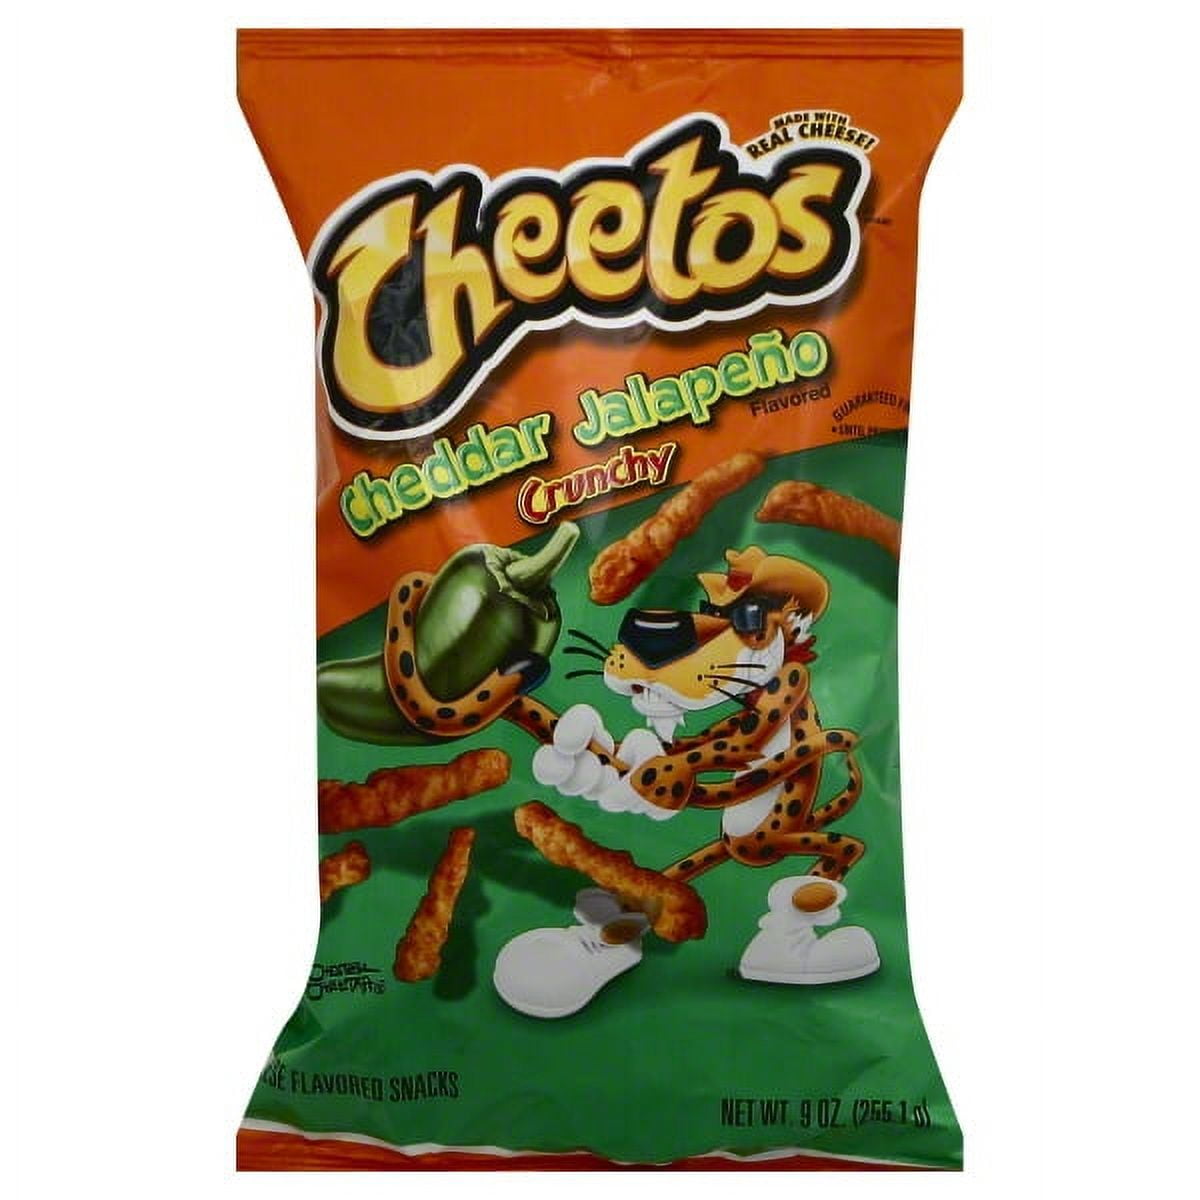 Cheetos Crunchy Cheddar Jalapeno Cheese Flavored Snacks, 8.5 oz